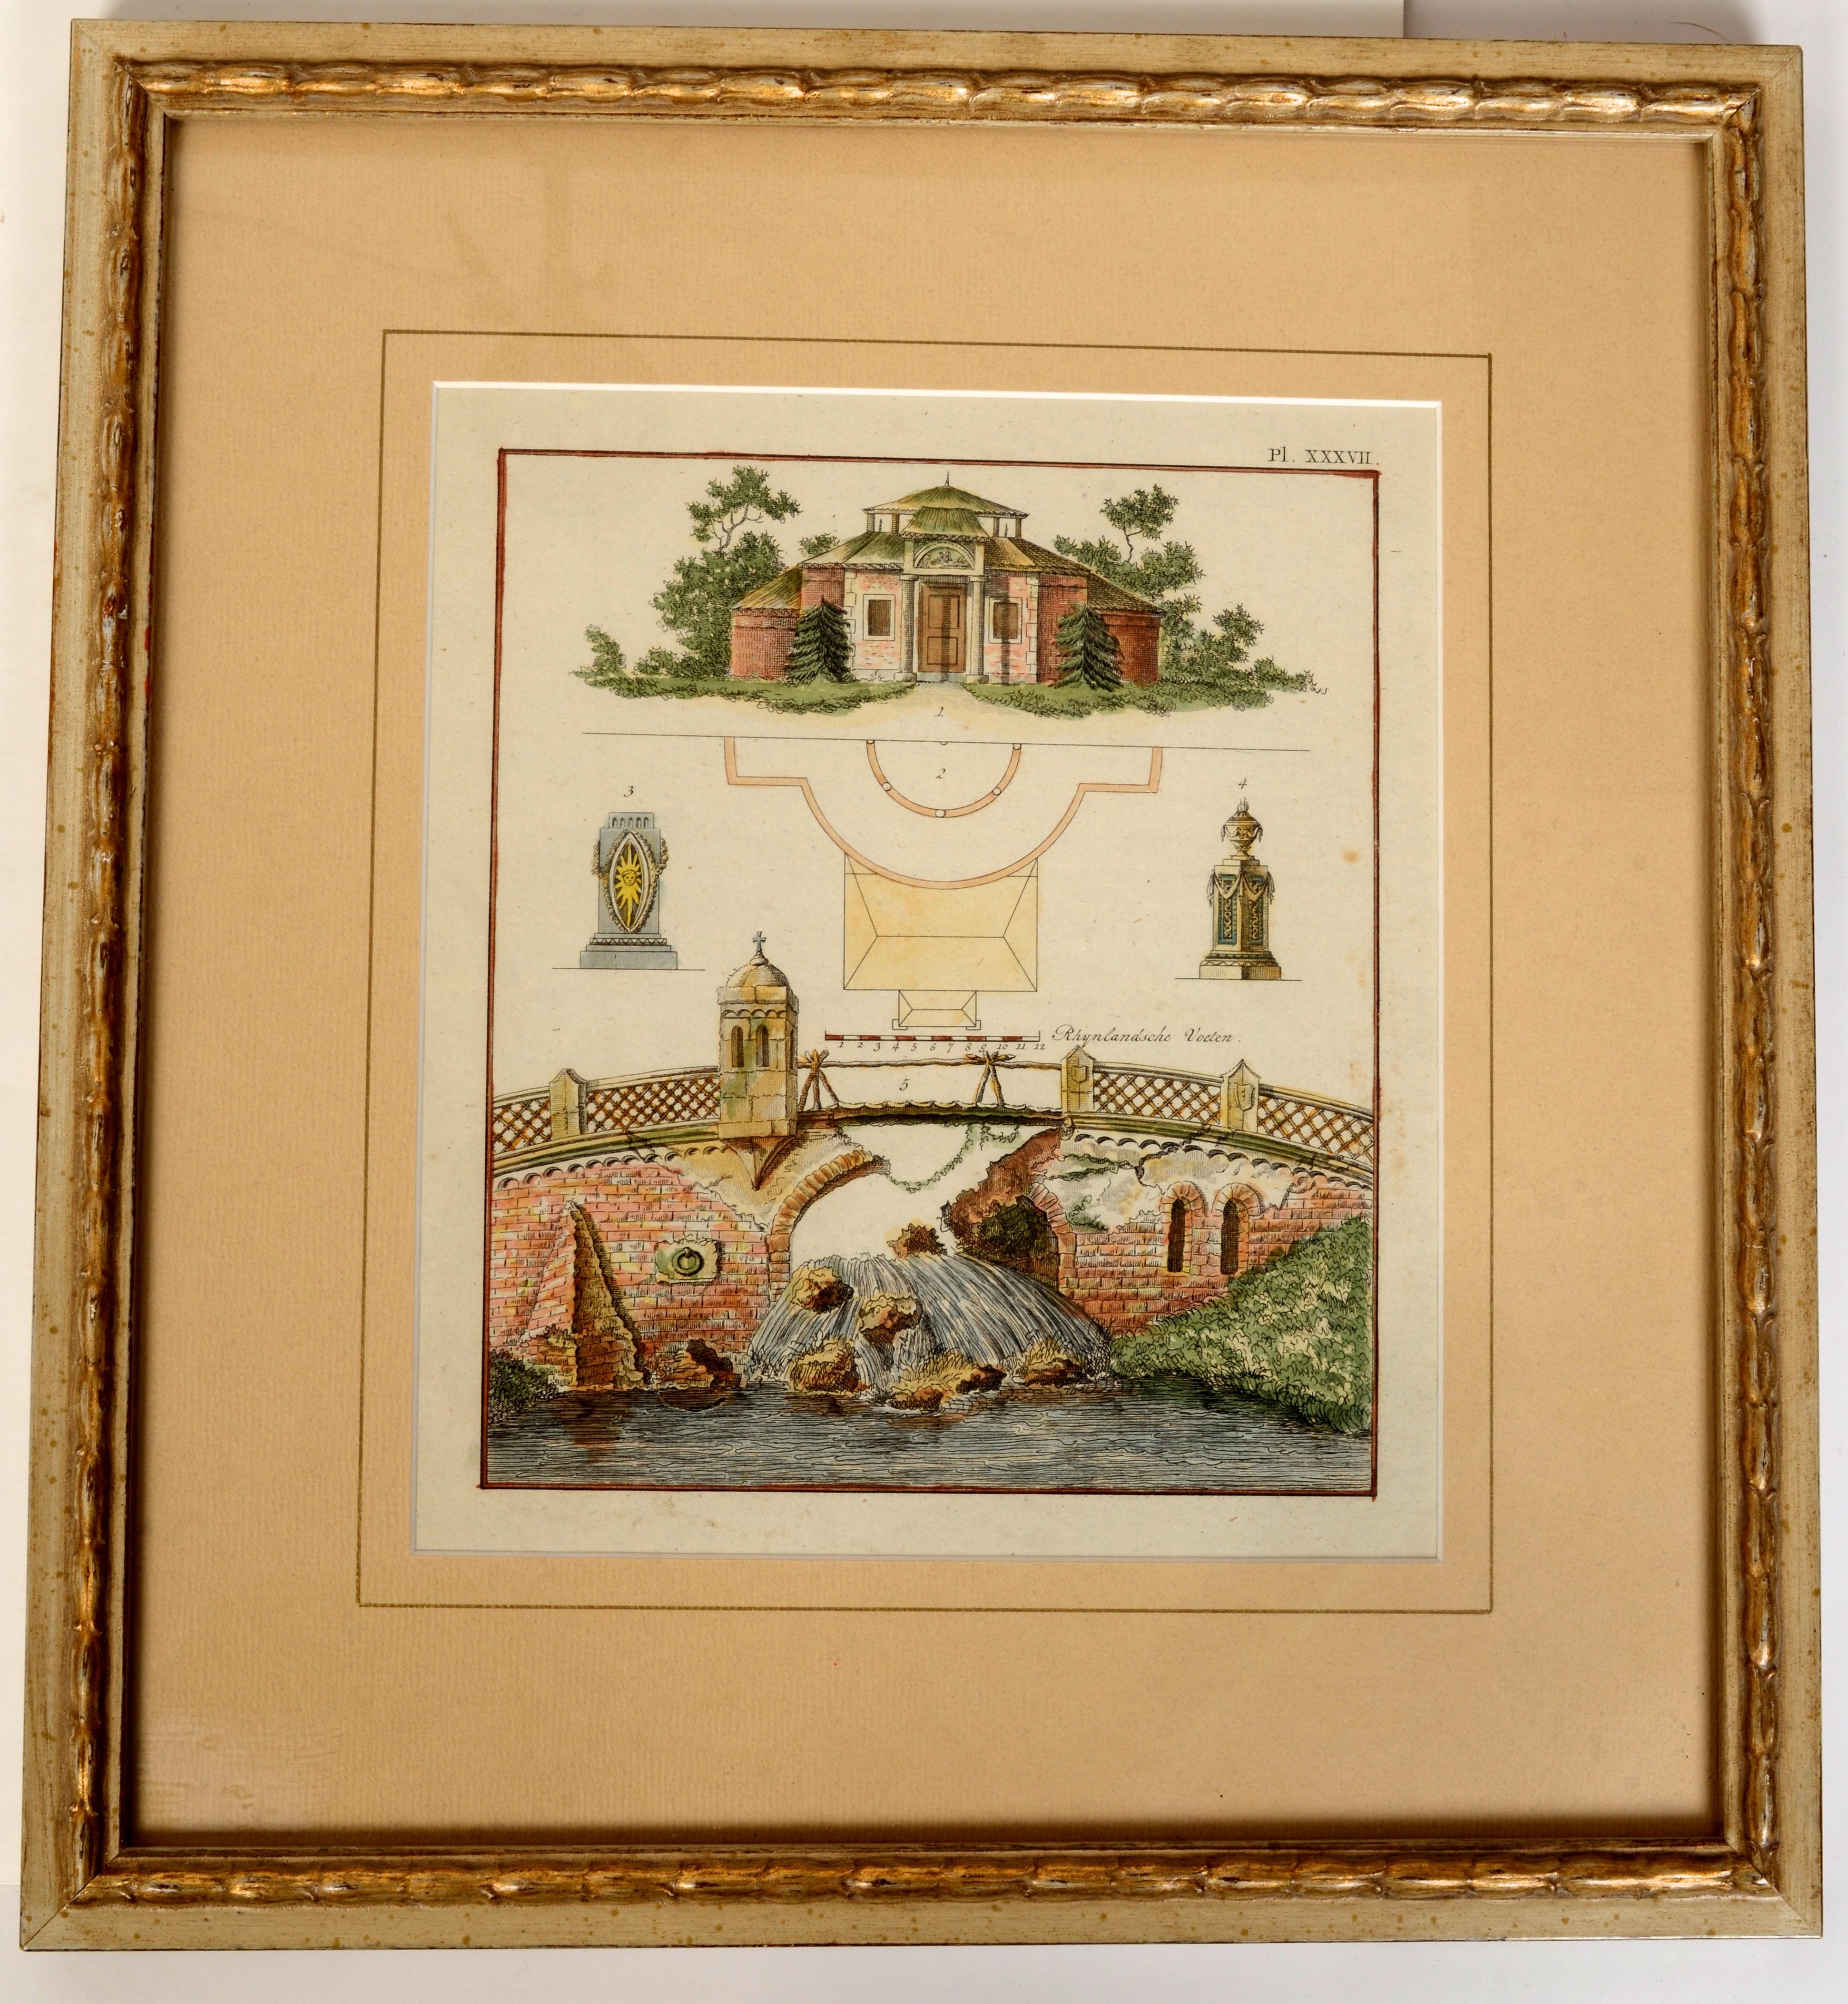 Set of 4 hand colored Antique Engravings of Garden Architecture by Van Laar, circa 1802. Prints are from 